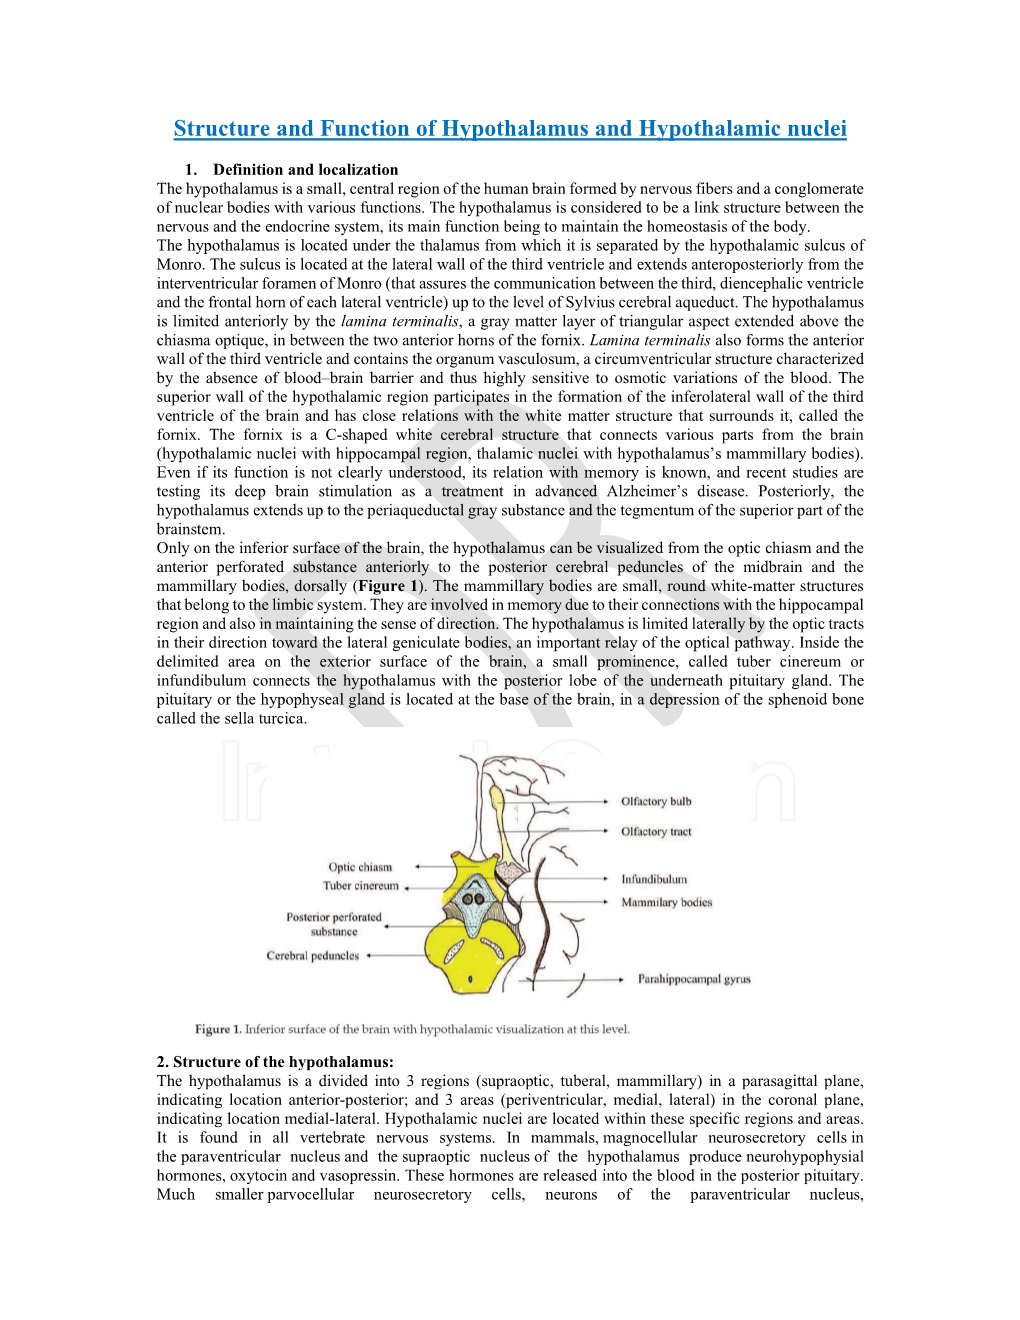 Structure and Function of Hypothalamus and Hypothalamic Nuclei